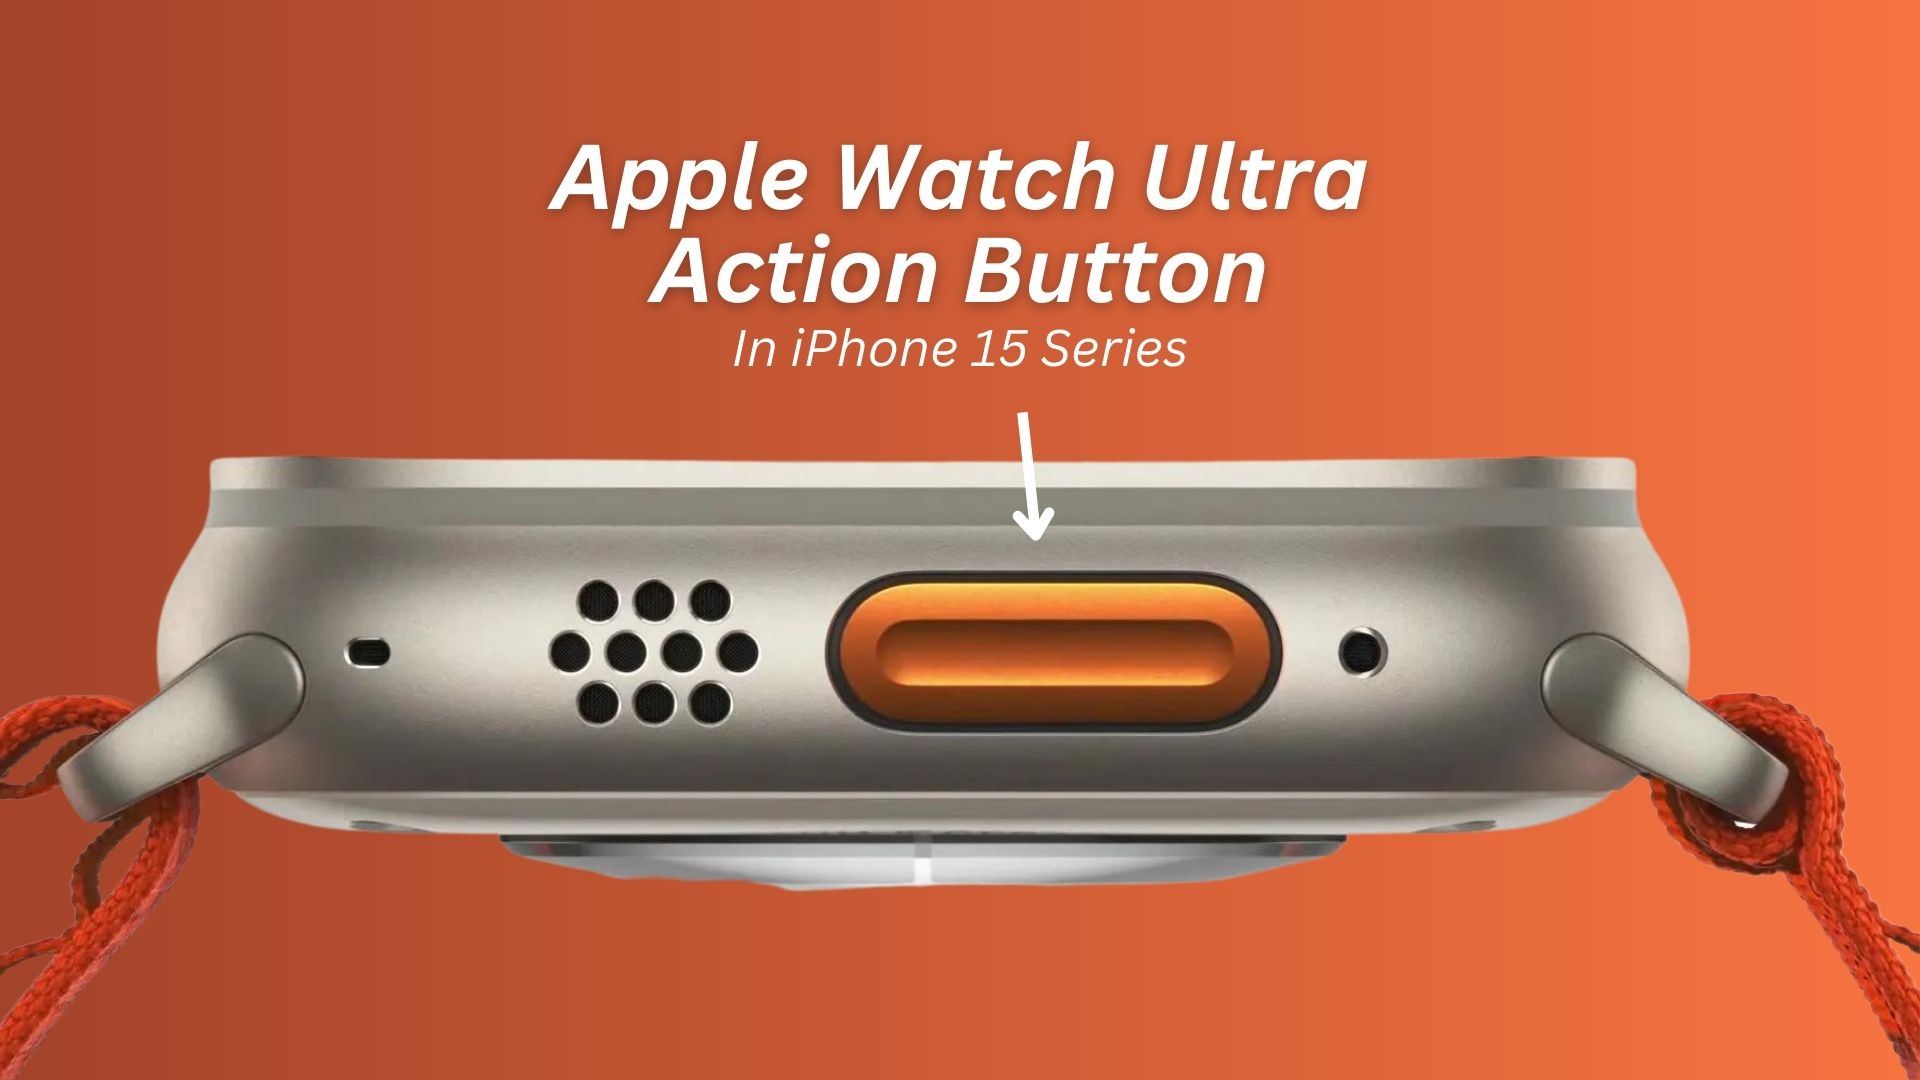 iPhone 15 with Action Button